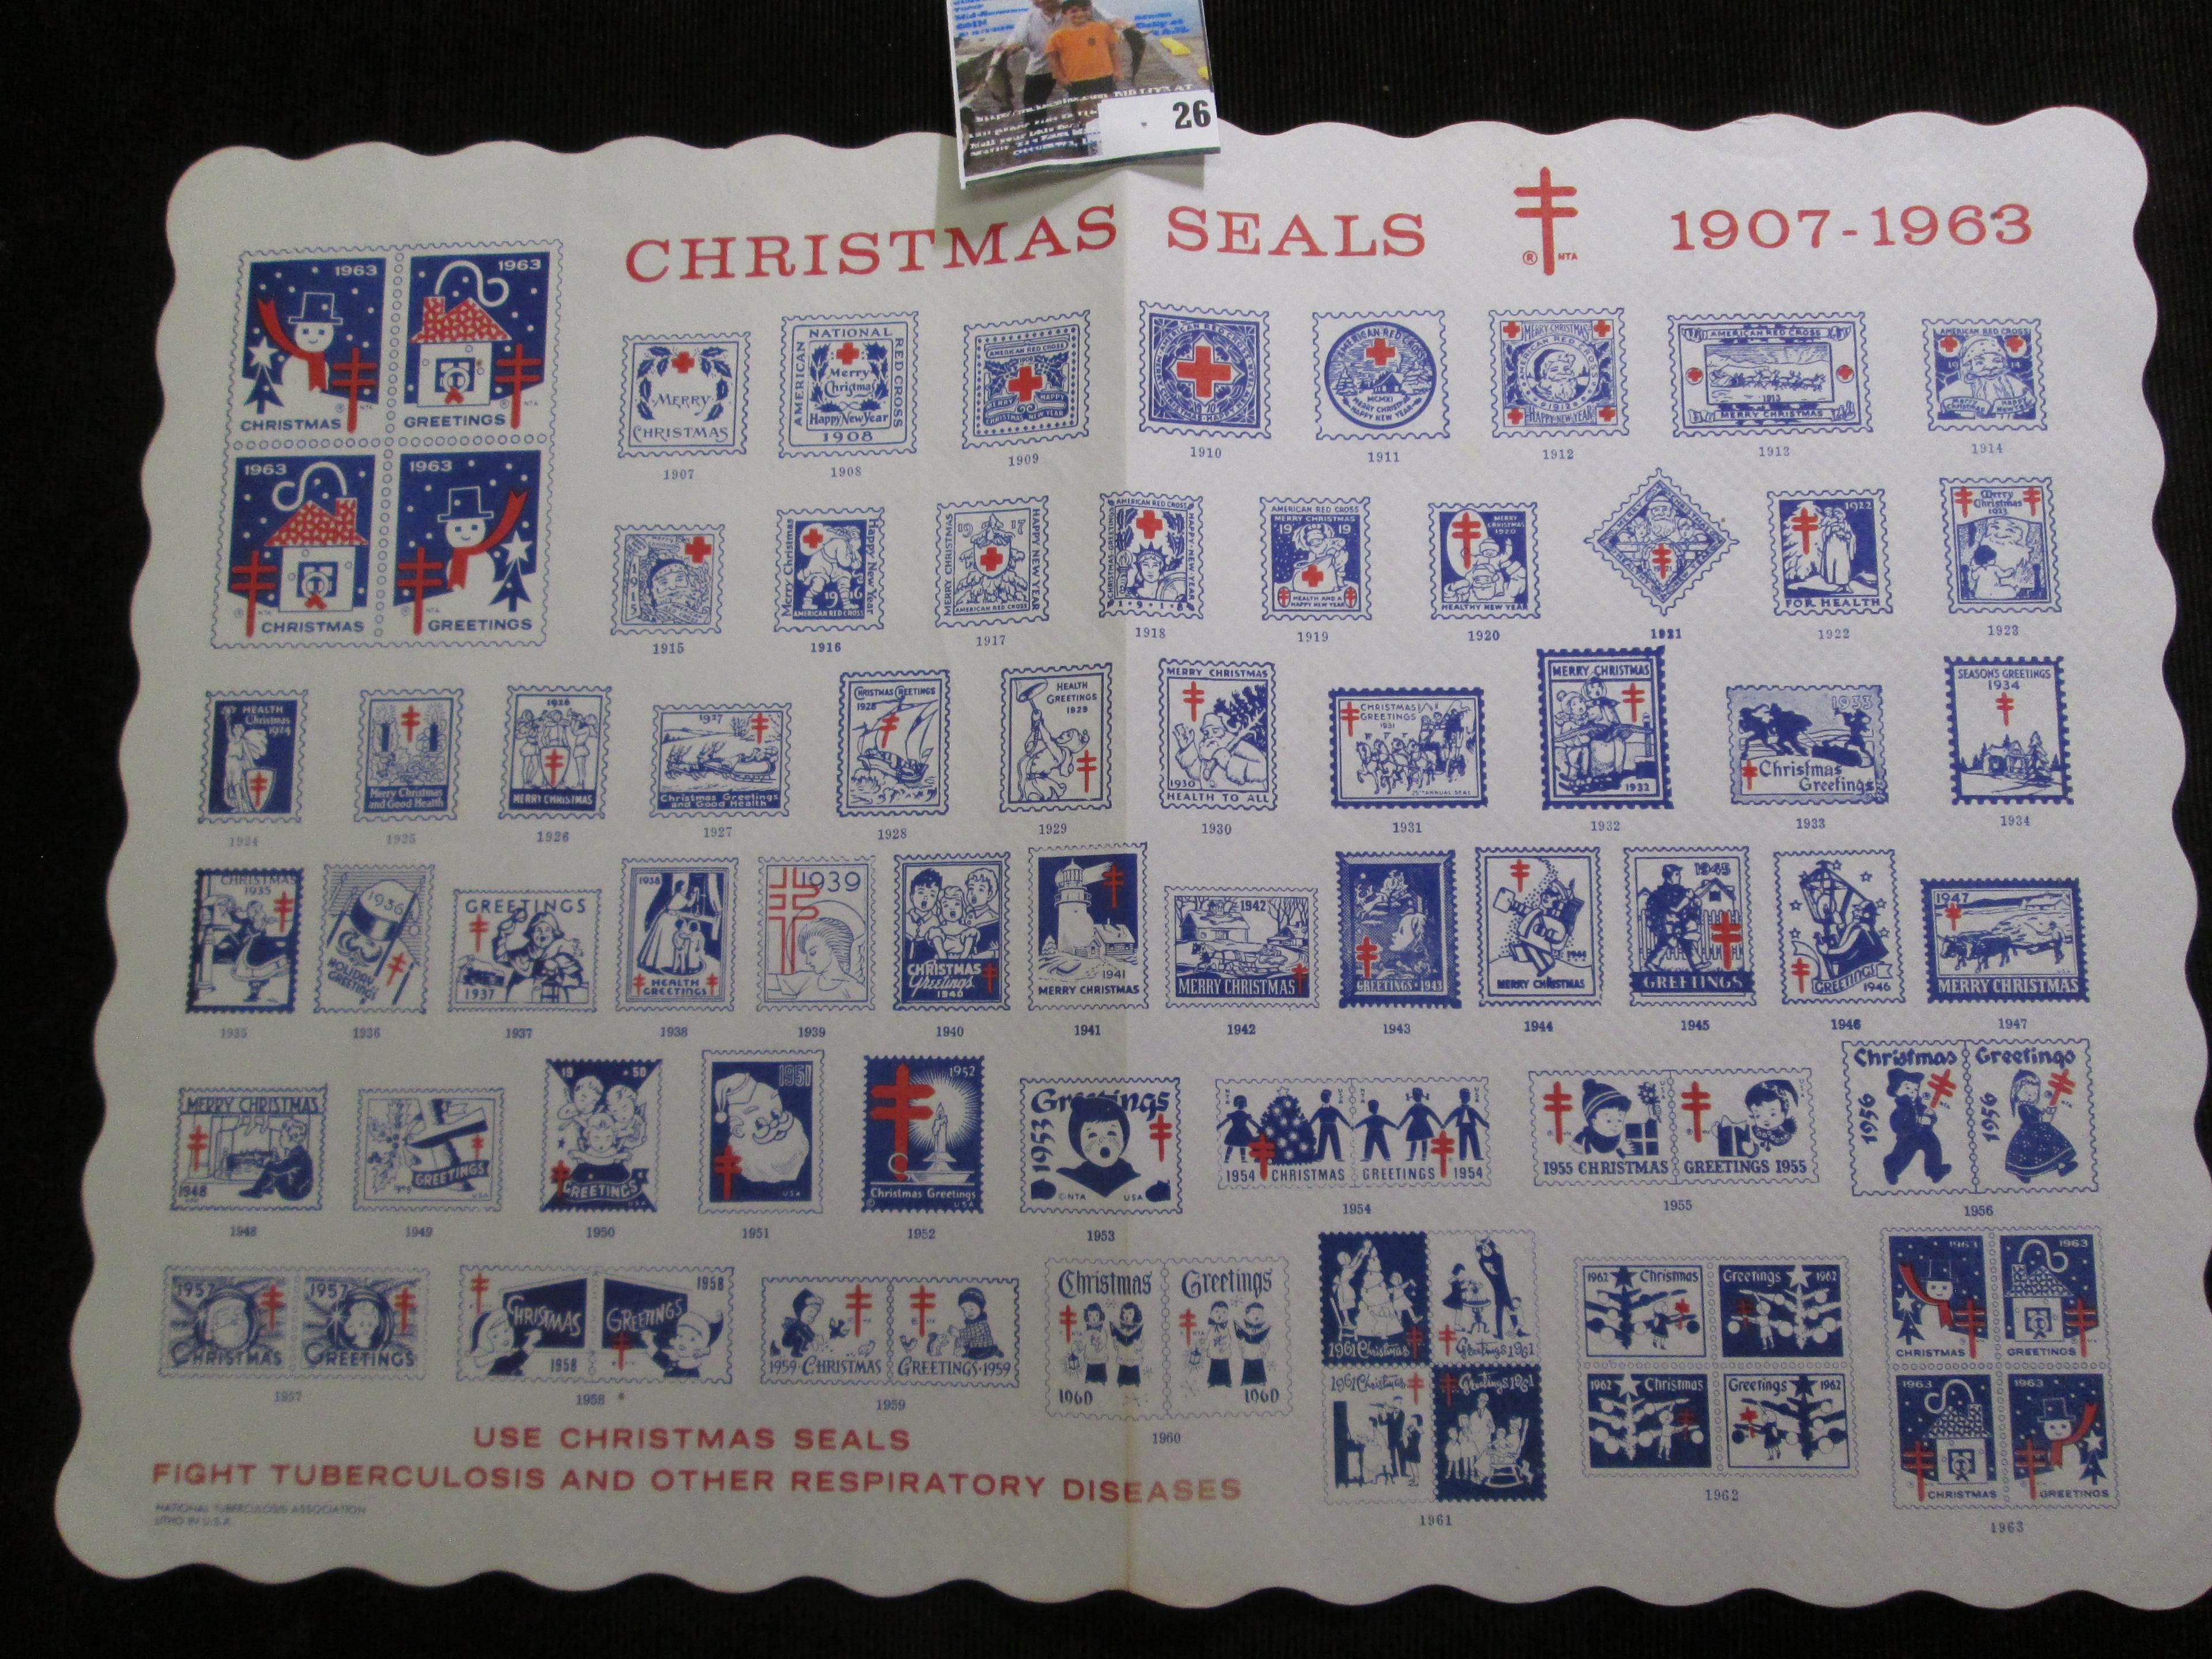 1907-1963 Christmas Seals National Tuberculosis Association Placemat; & (56) Mint U.S. Stamps.